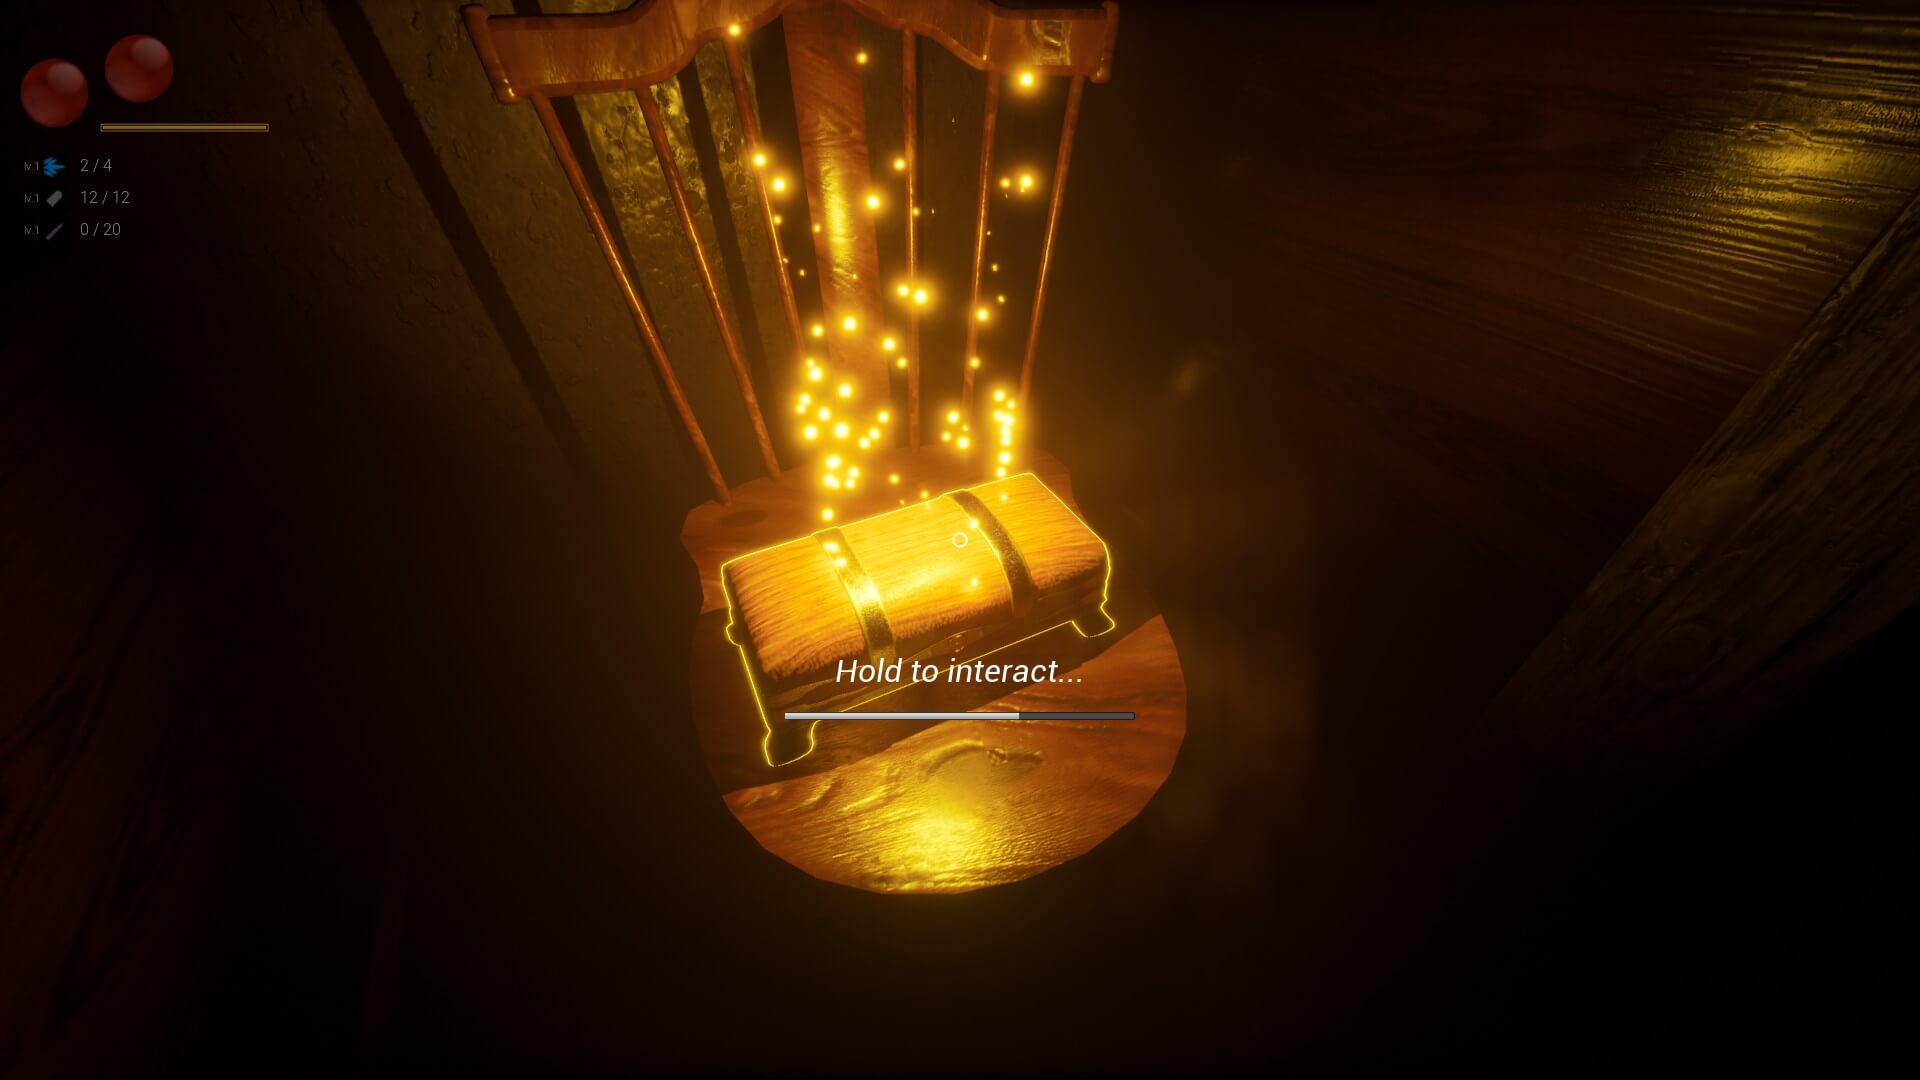 One of the relics I discovered. It looks-like a music box and has a yellow glowing particles coming from it.